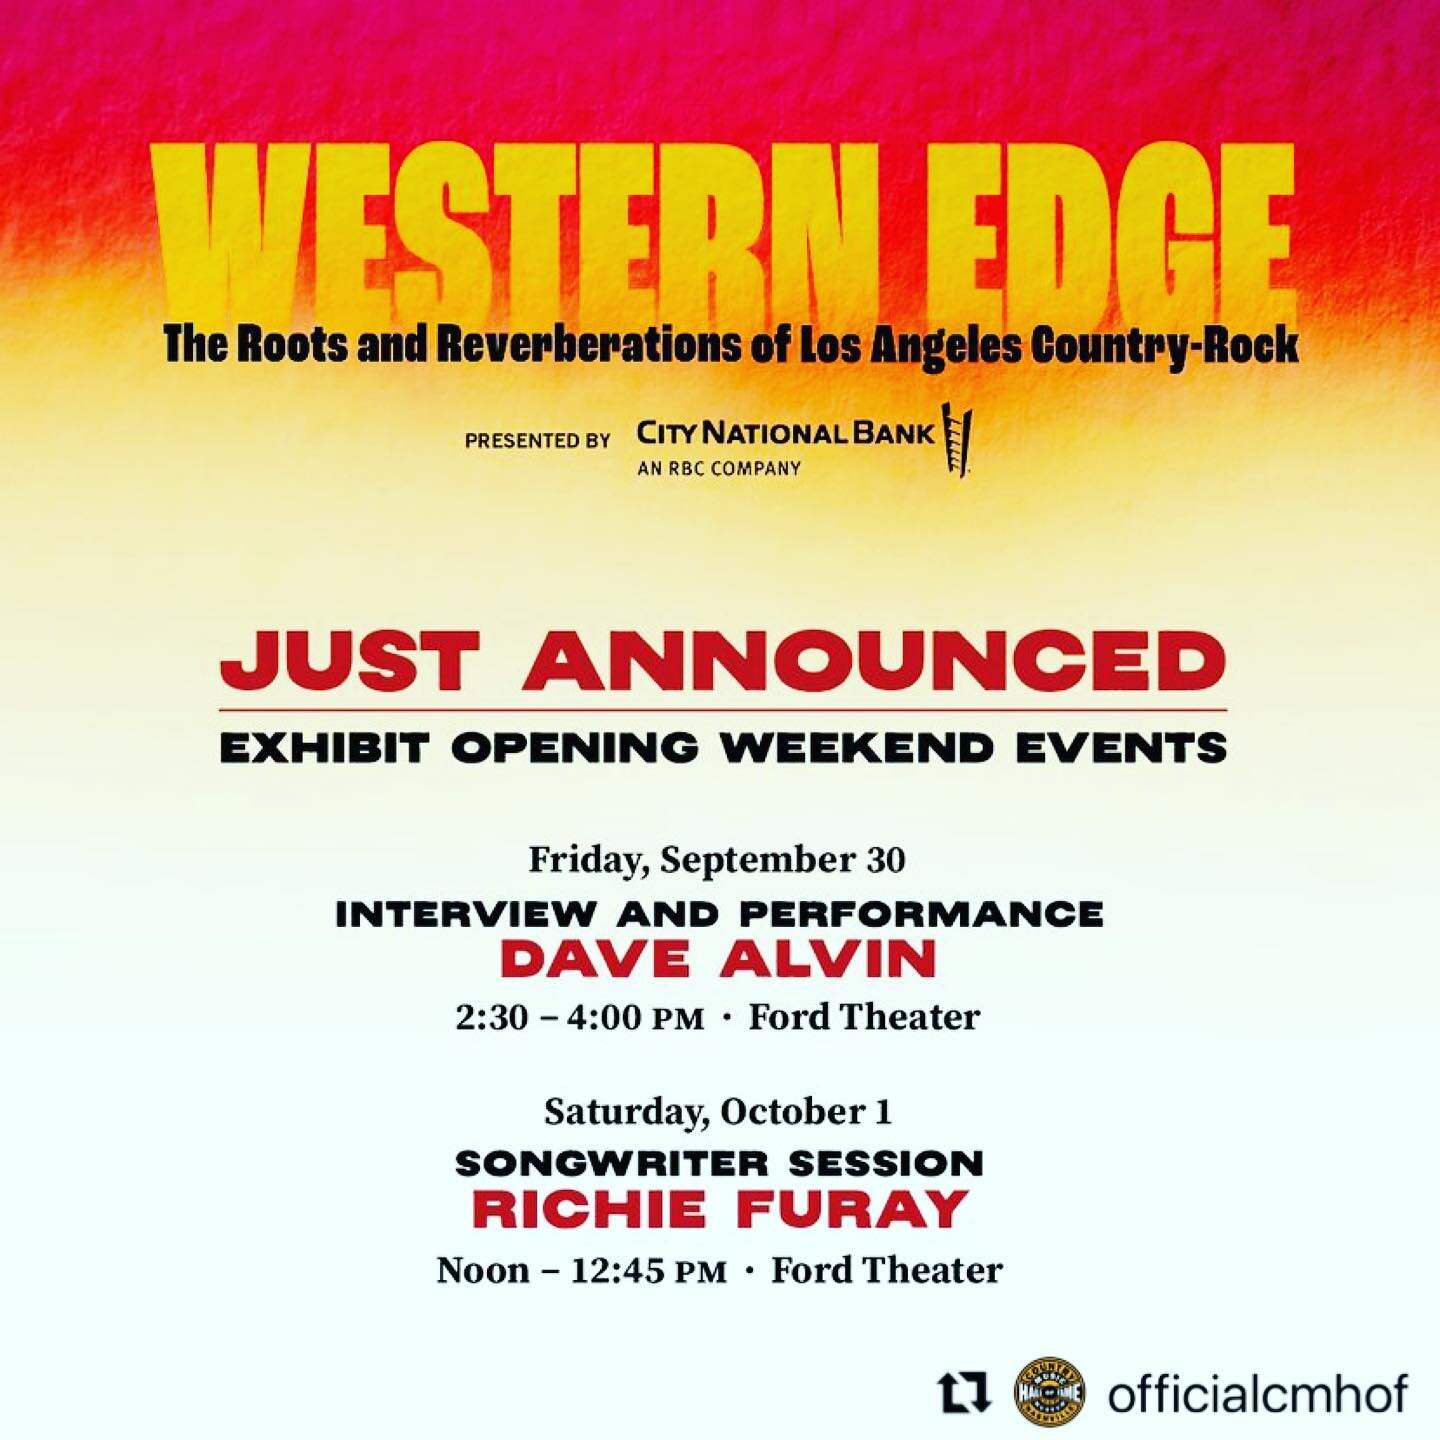 #Repost @officialcmhof with @use.repost
・・・
JUST ANNOUNCED: the program lineup for opening weekend of &ldquo;Western Edge: The Roots and Reverberations of Los Angeles Country-Rock,&rdquo; presented by @CityNationalBank. The new exhibit opens Septembe